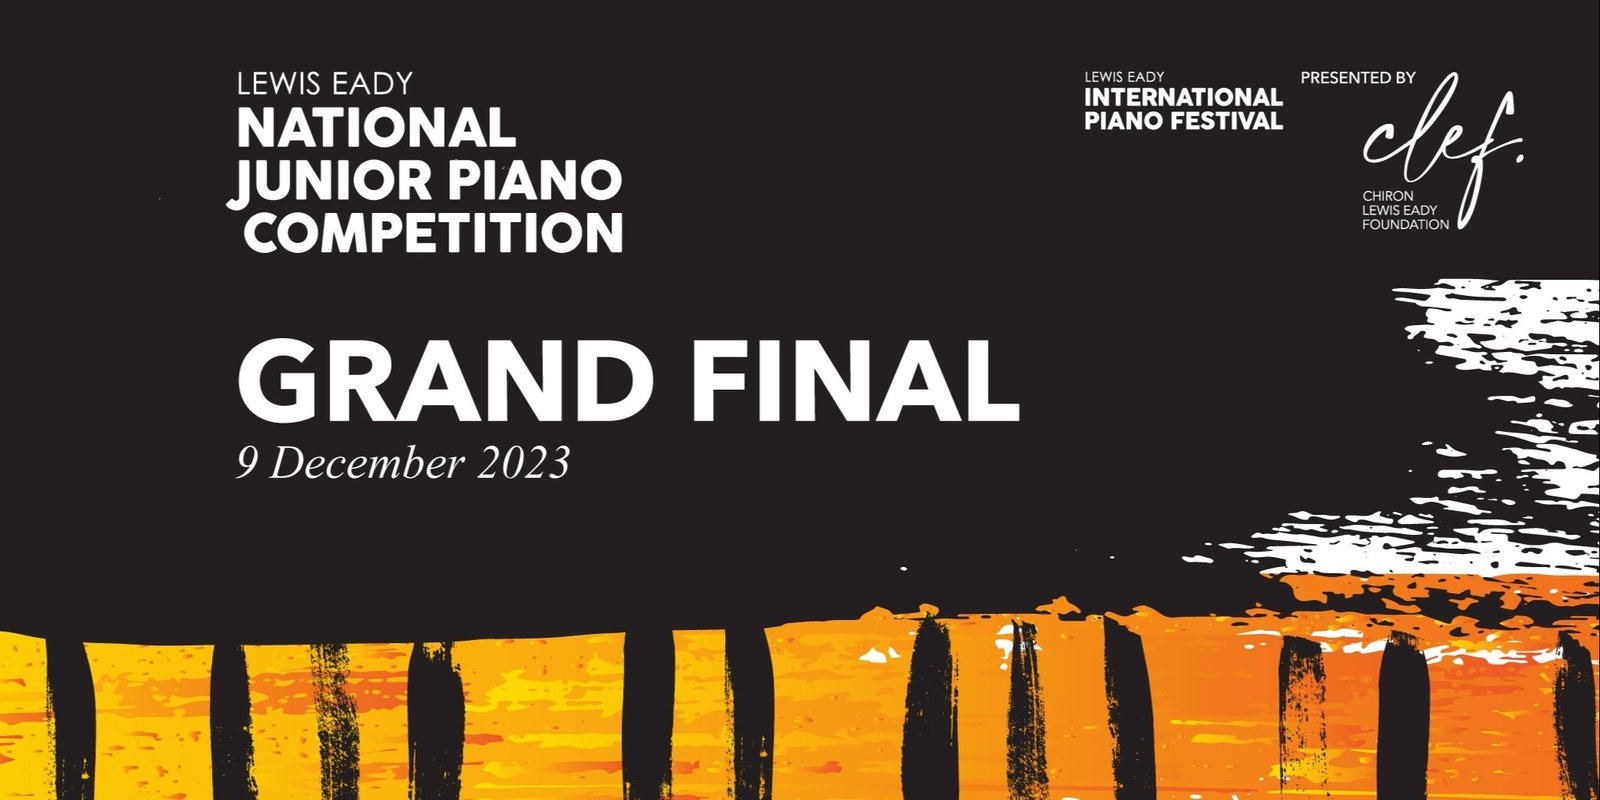 Banner image for LEWIS EADY NATIONAL JUNIOR PIANO COMPETITION | GRAND FINAL